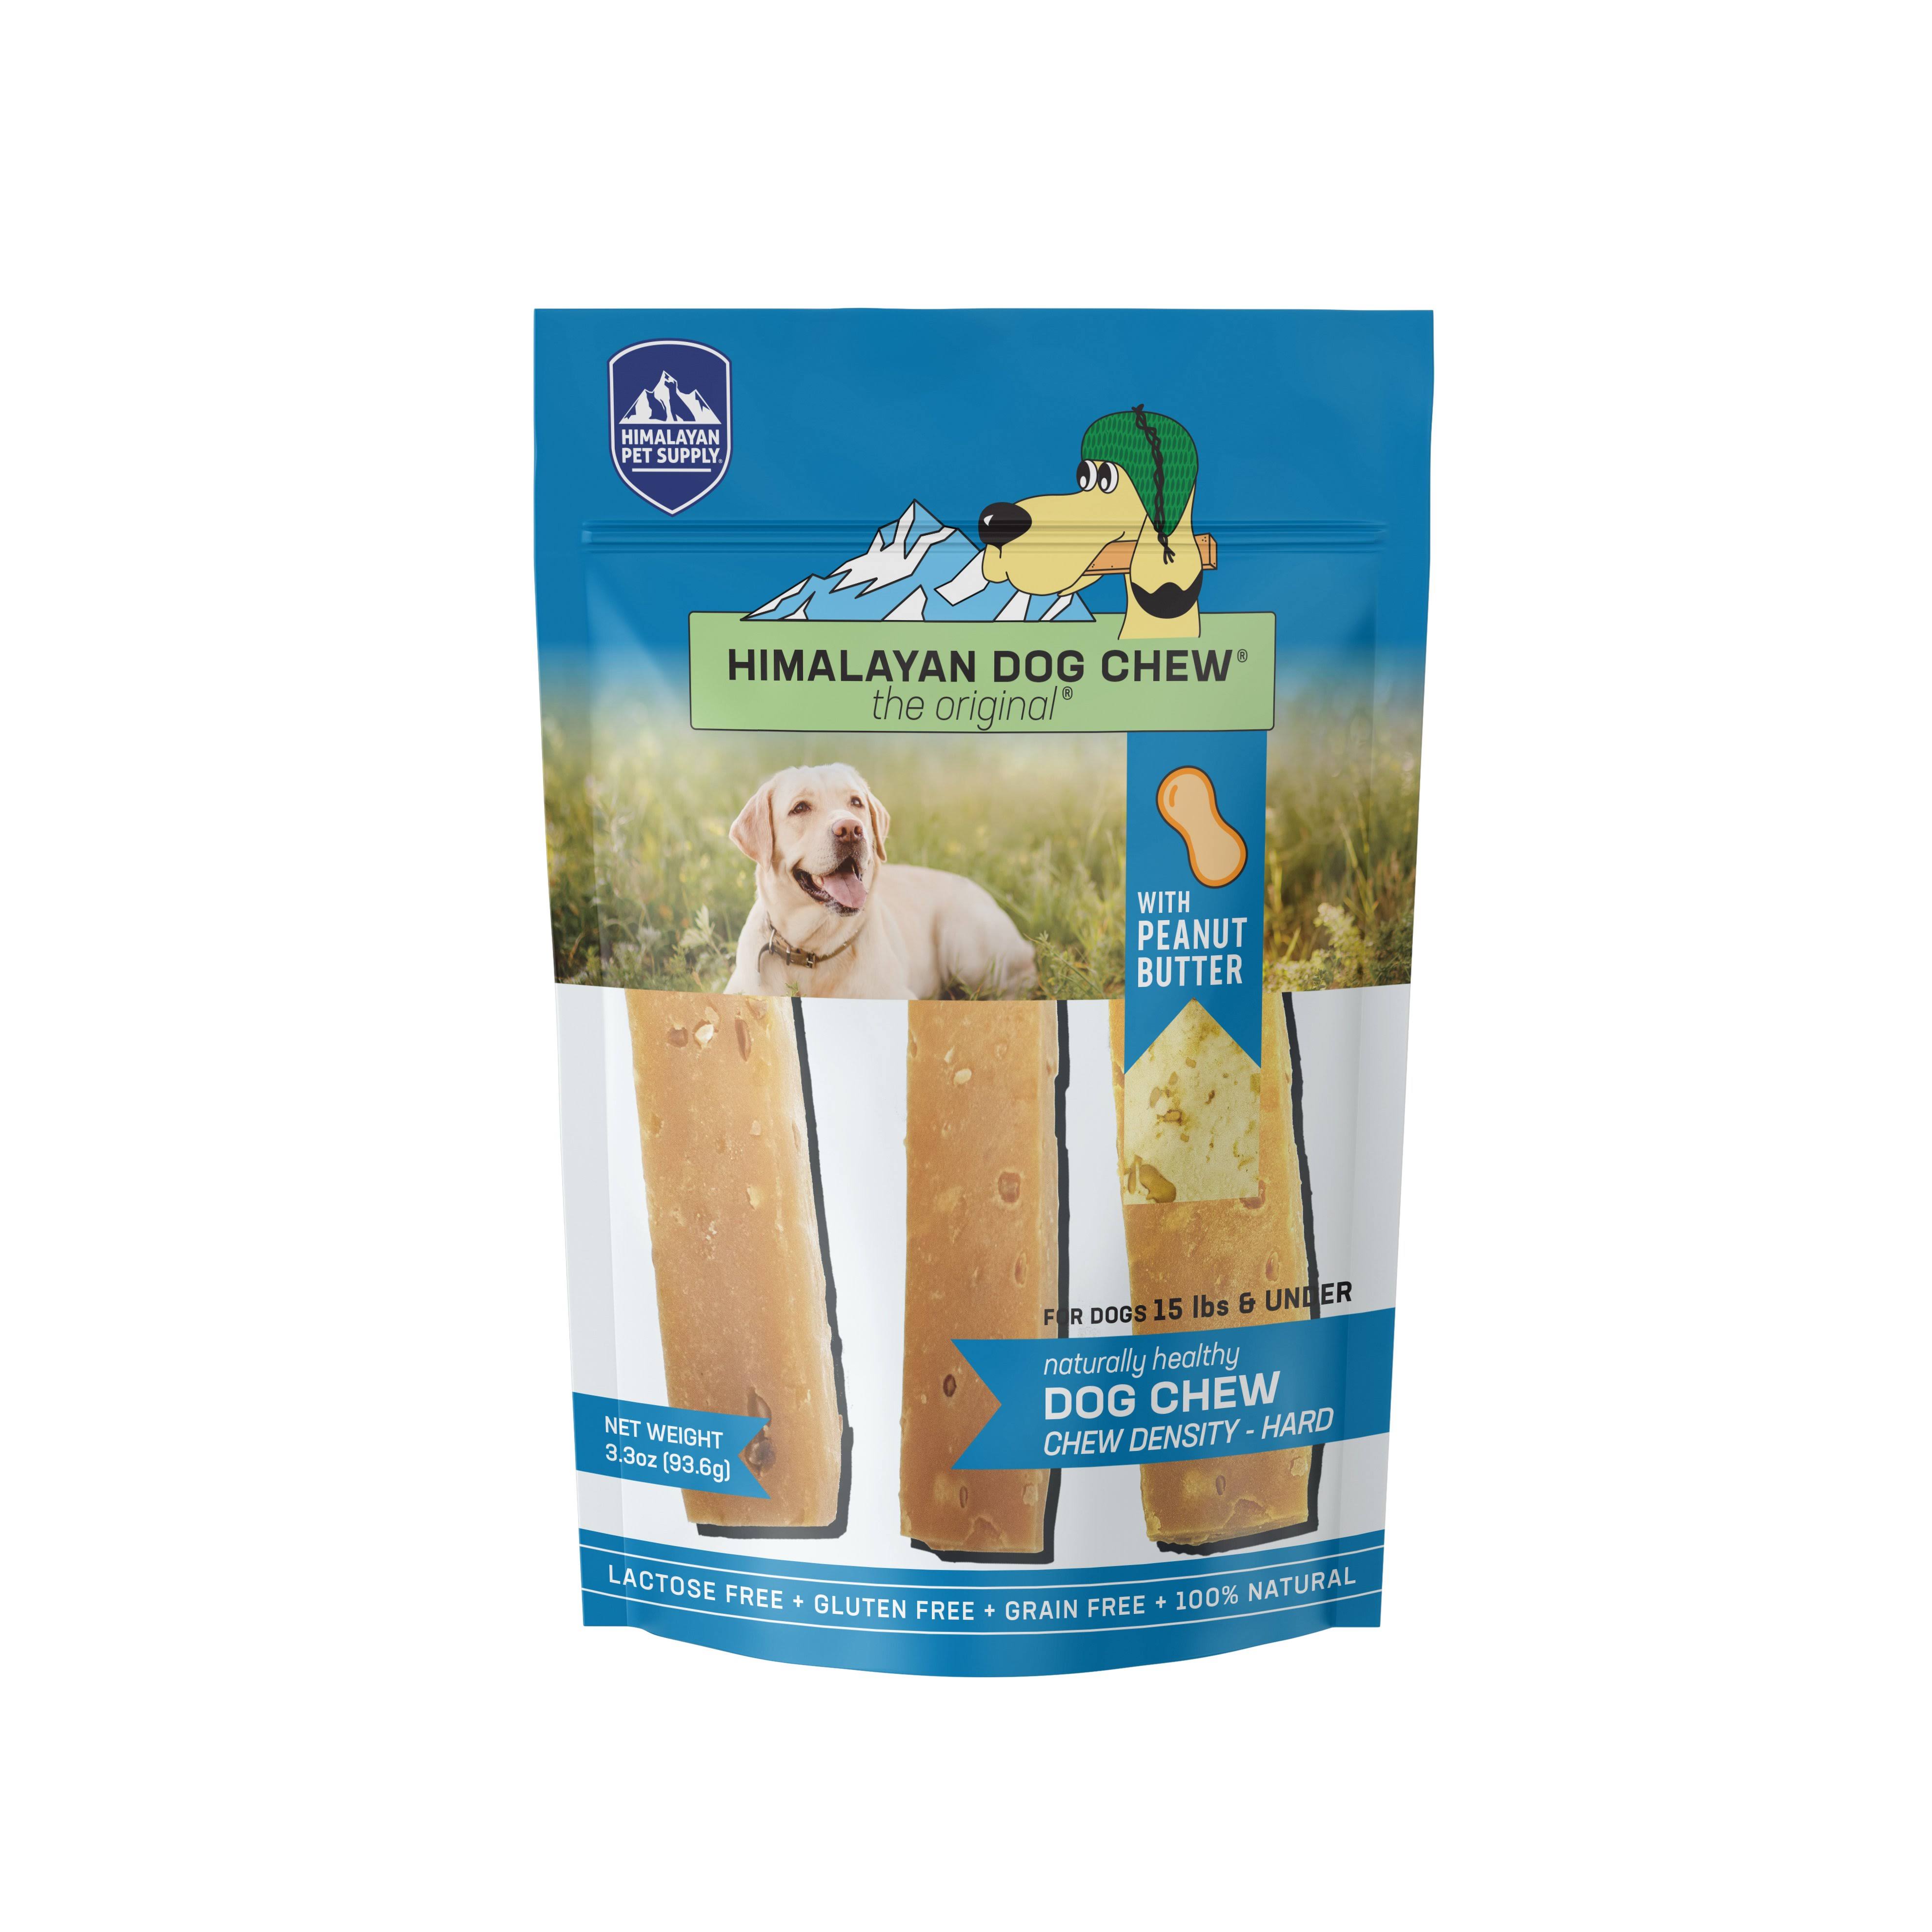 Himalayan Pet Supply, Himalayan Dog Chew, Hard, For Dogs 15 lbs & Under, Peanut Butter, 3.3 oz (93.6 g)